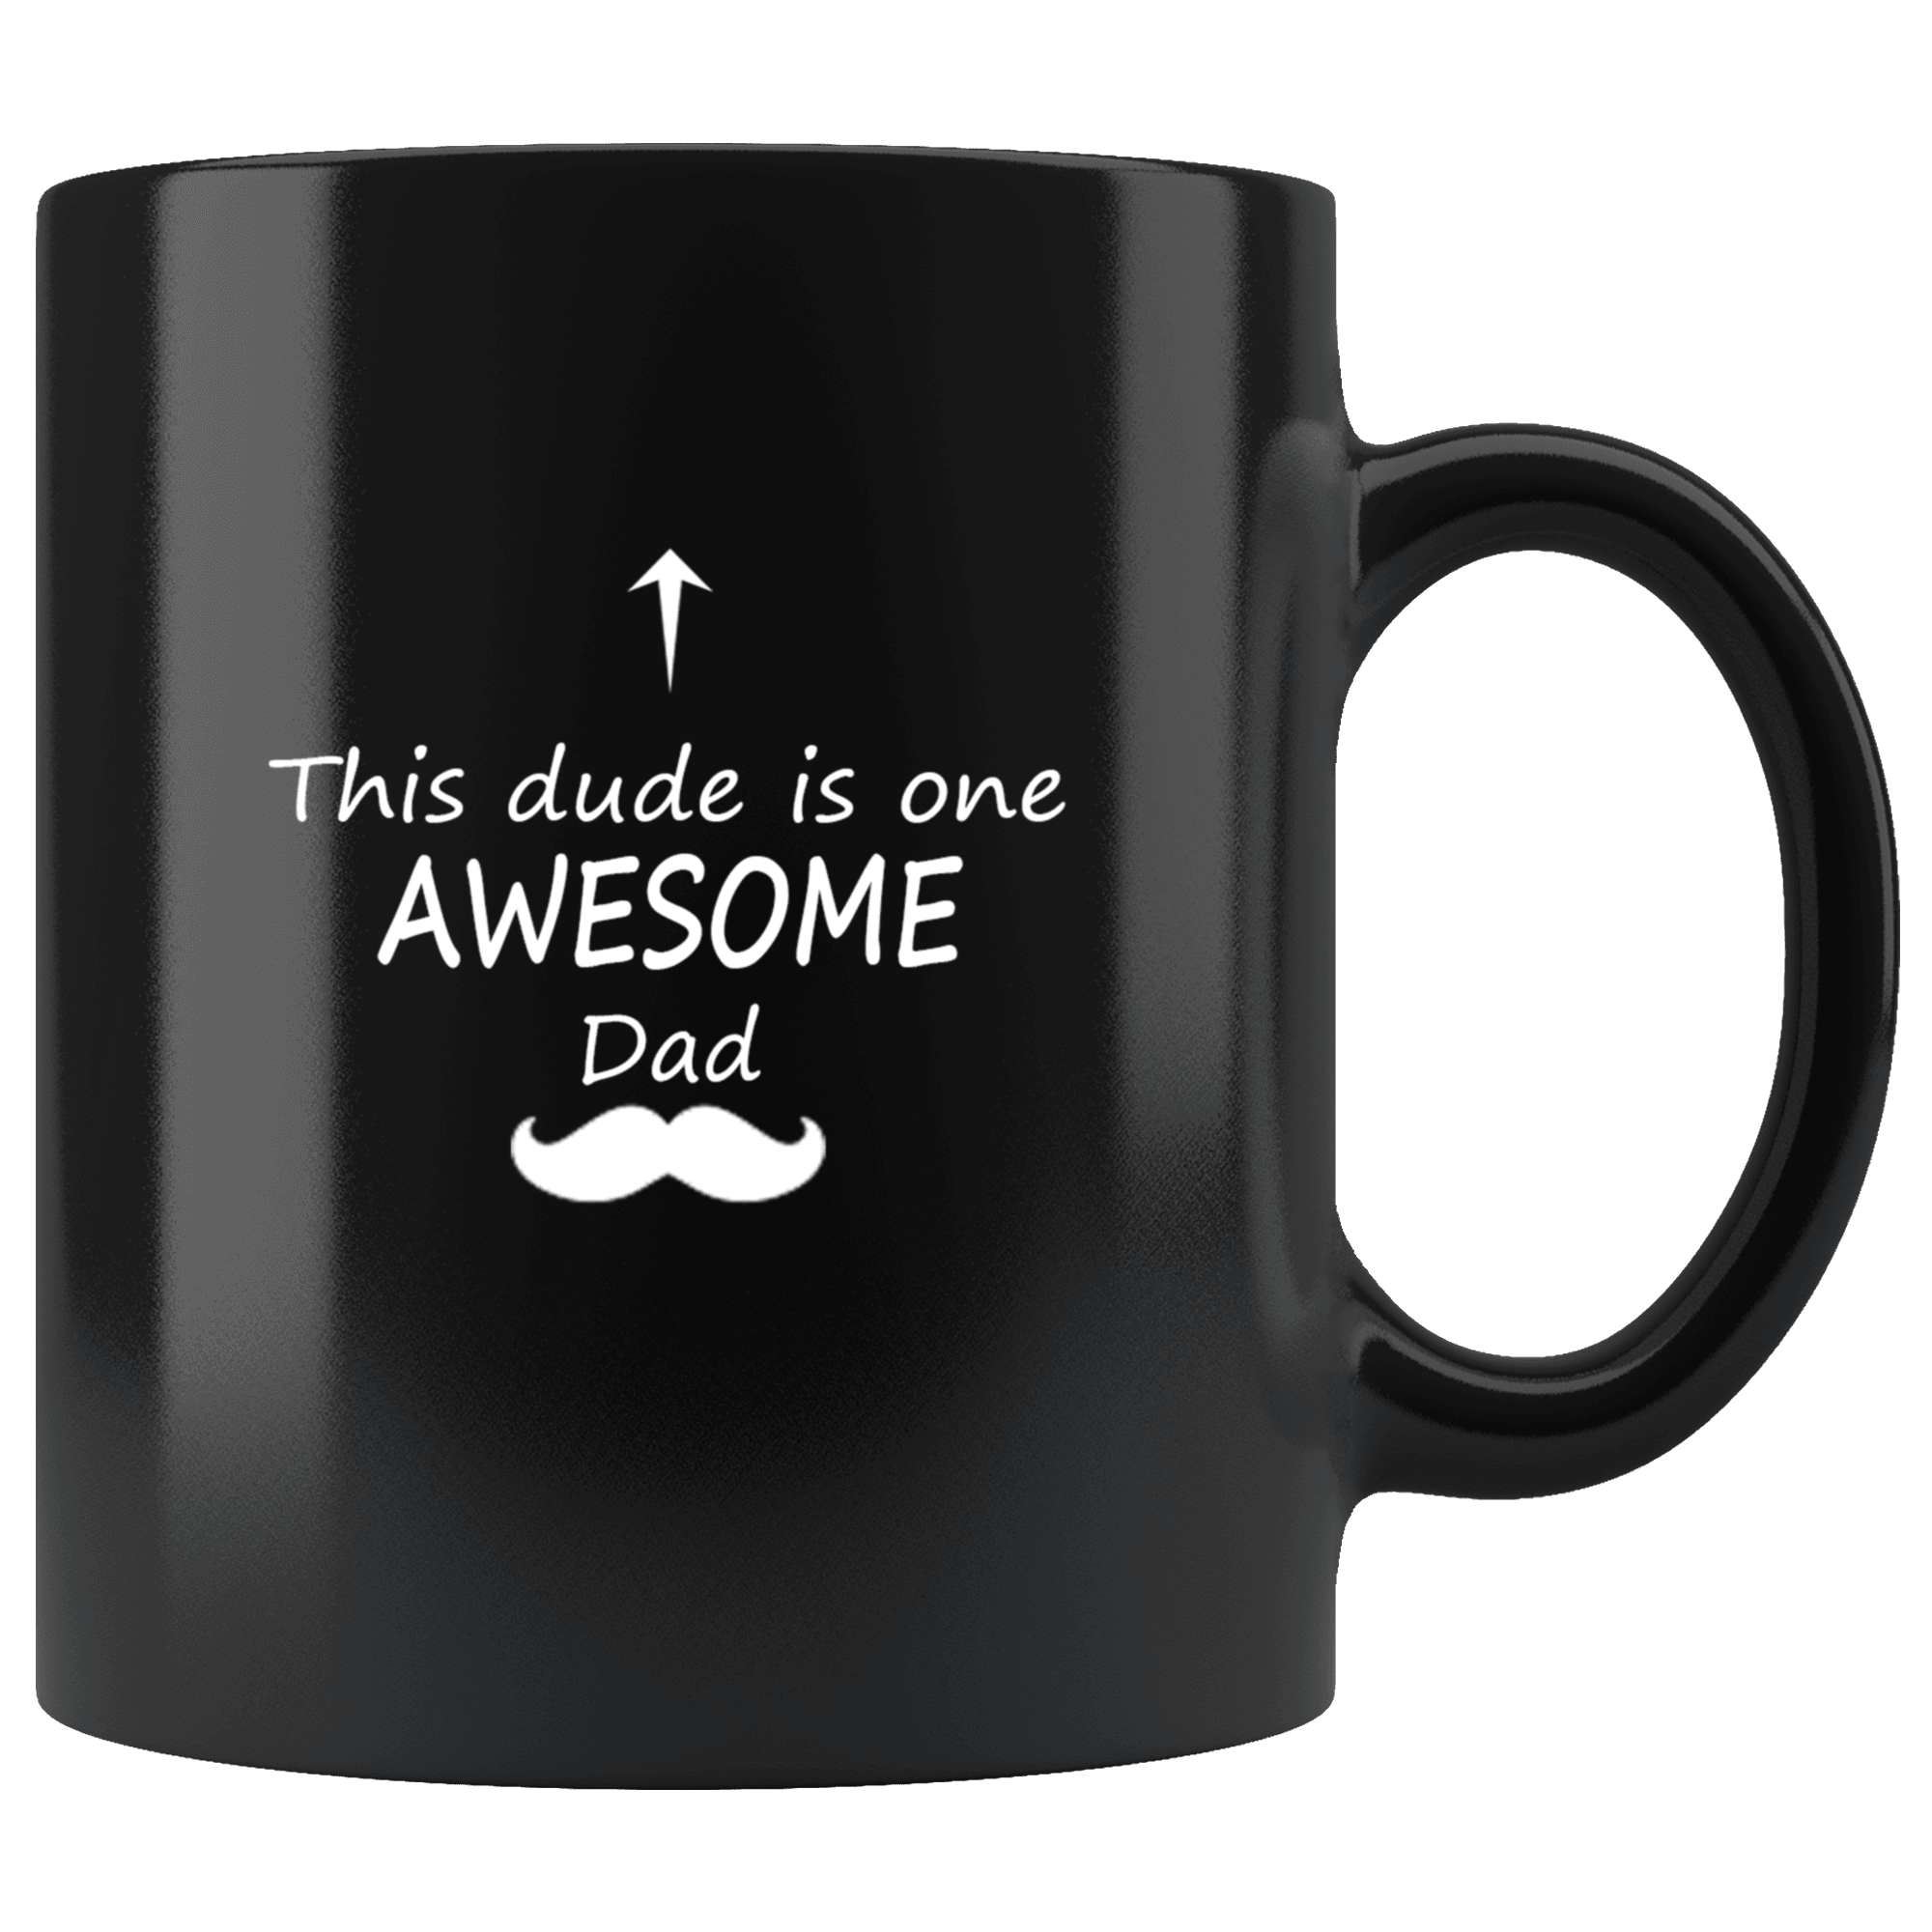 Great Coffee Mug For Father - This Dude Is One AWESOME Dad - P211